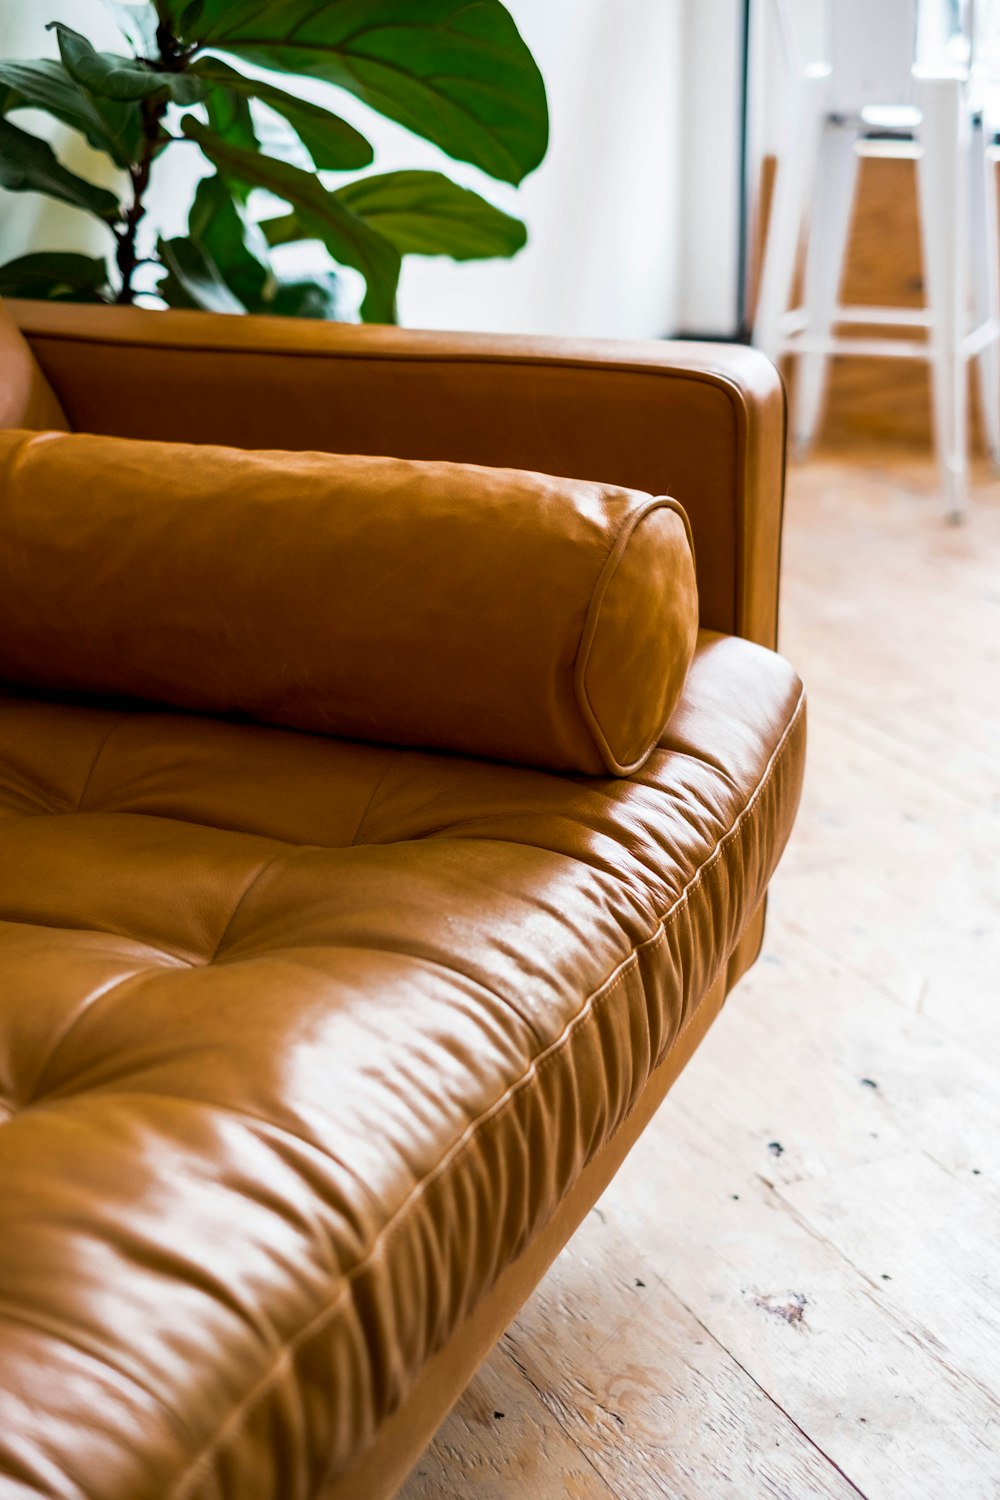 Brown Leather Couch On White Ceramic, Tan Leather Couches